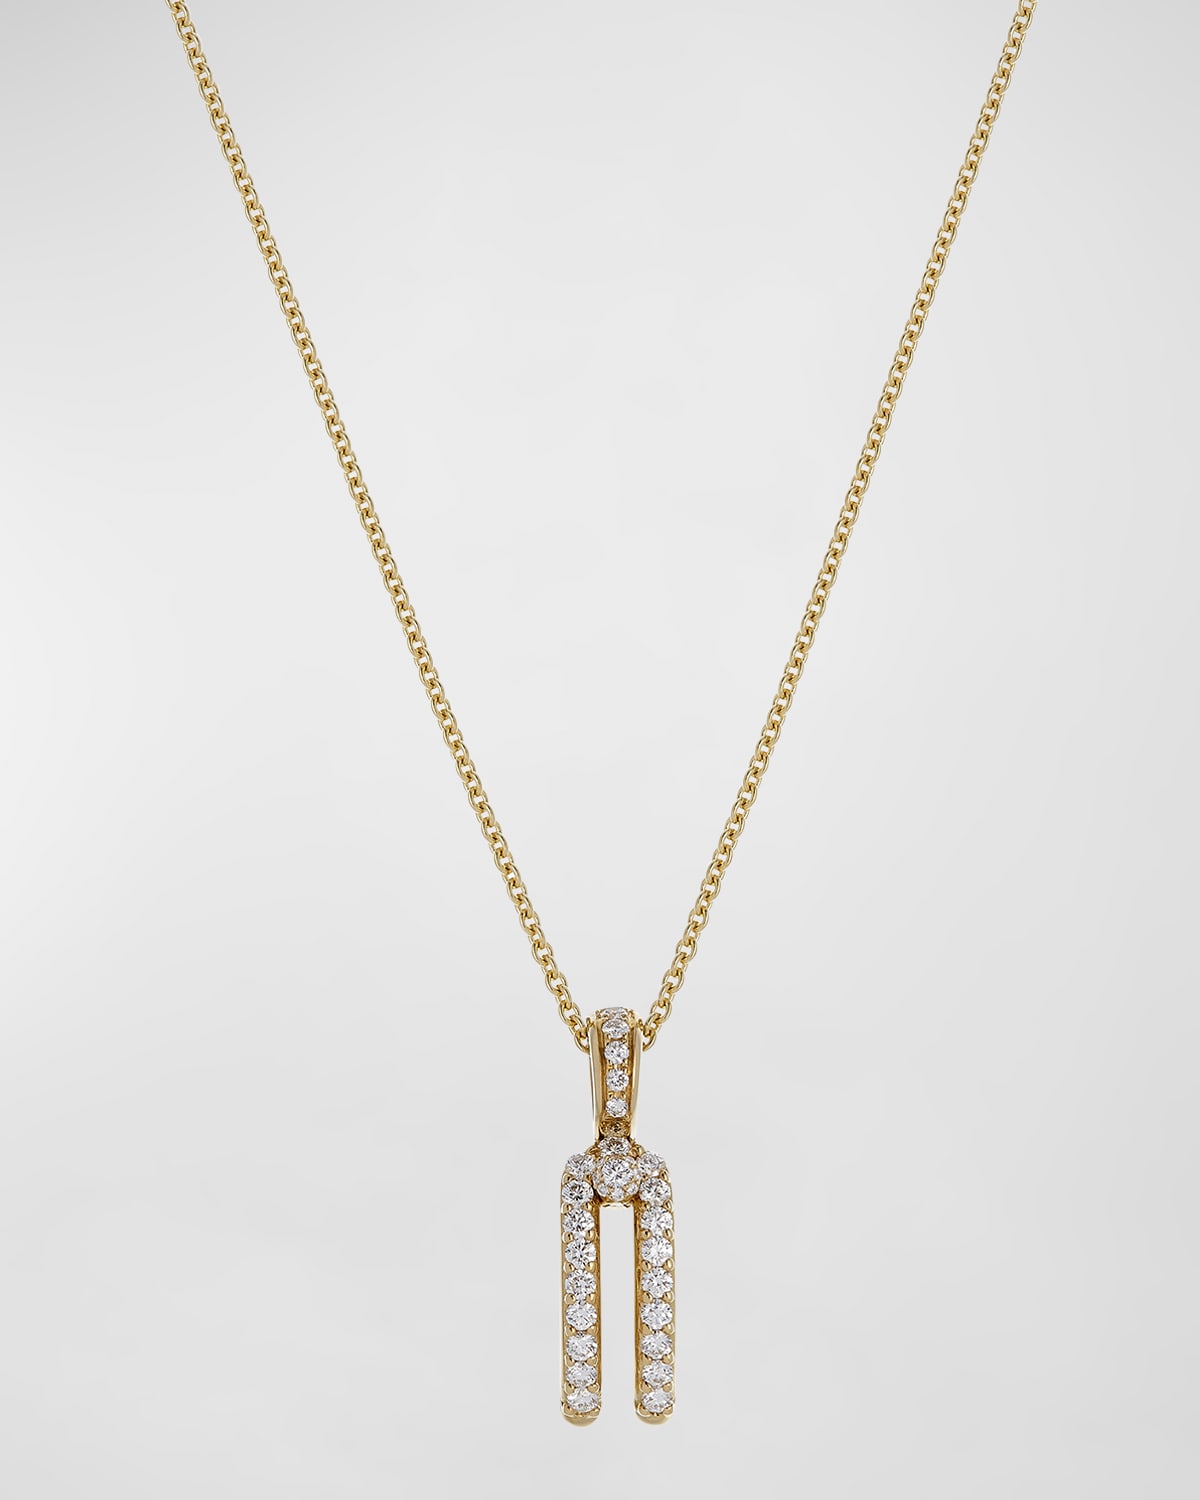 Krisonia 18k Yellow Gold Necklace With Diamond Double Prong